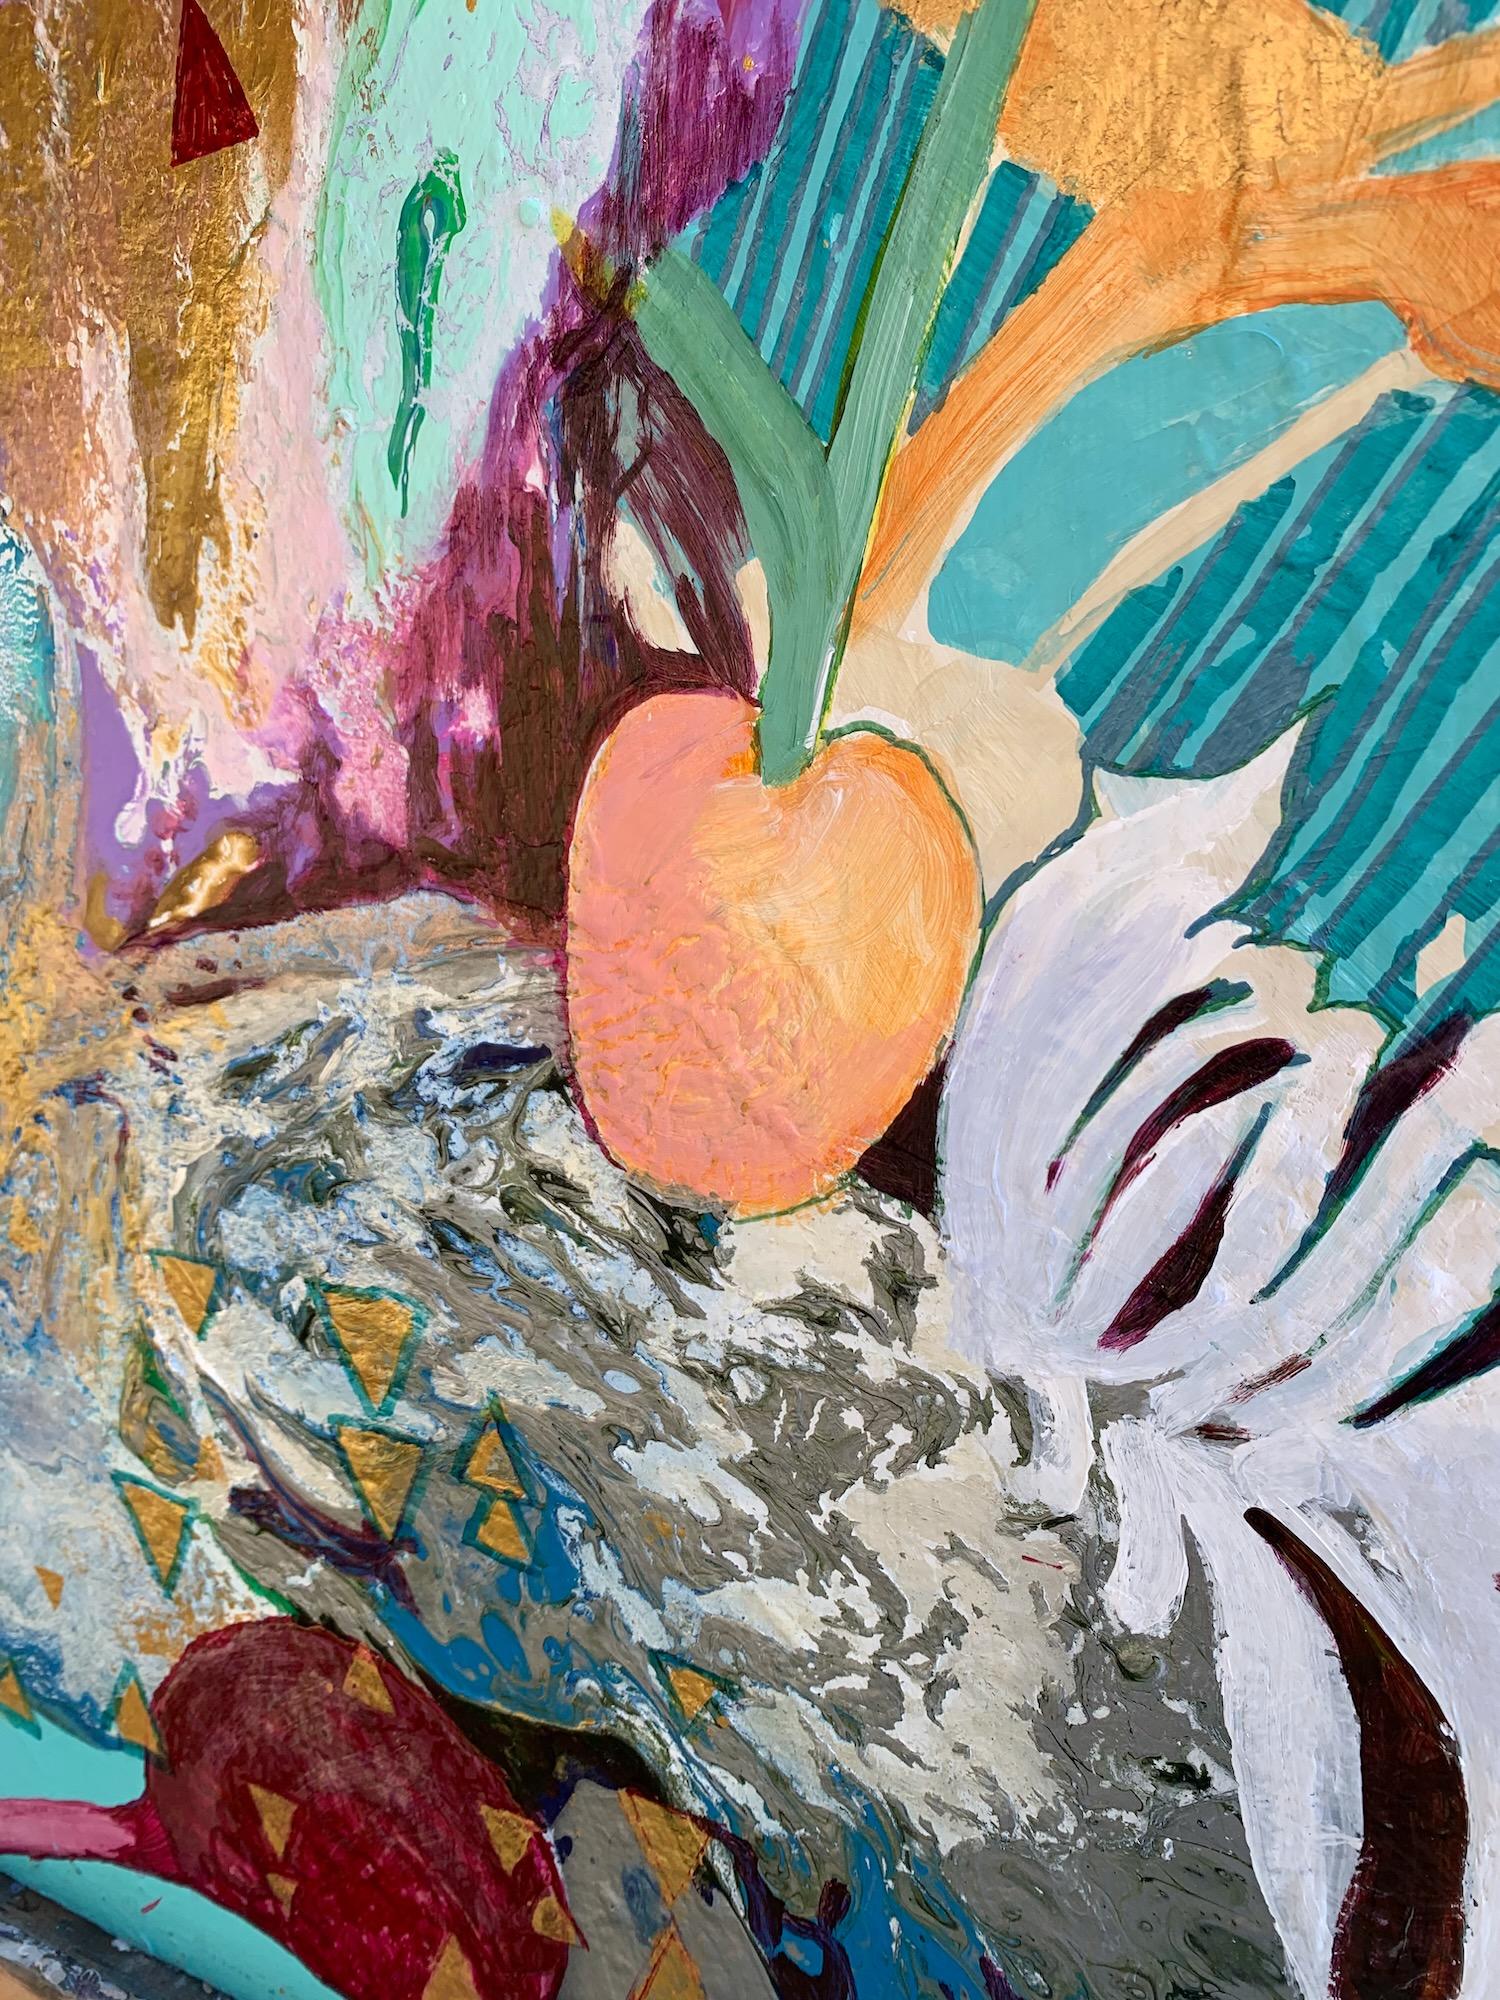 <p>Artist Comments<br>Artist Julia Hacker offers a visual treat of color, shape, and dynamic composition. Pink and white flora with various fruits springs from fluid rock-like formations highlighted with silver and gold metallic paint. This shimmer